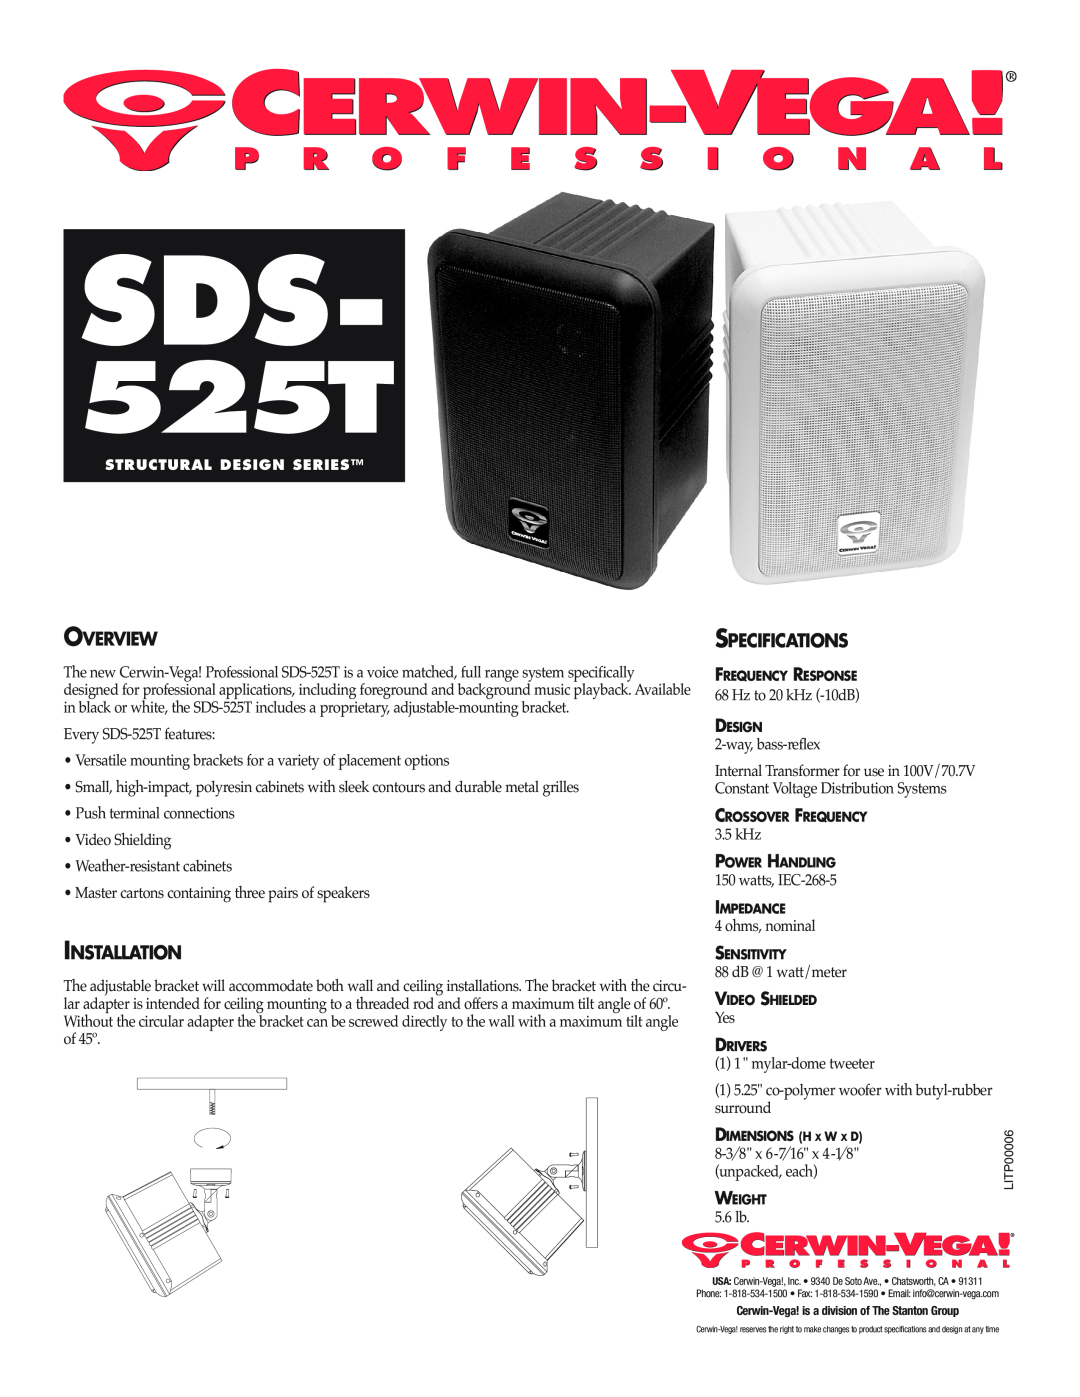 Cerwin-Vega SDS-525T specifications Overview, Specifications, Installation 